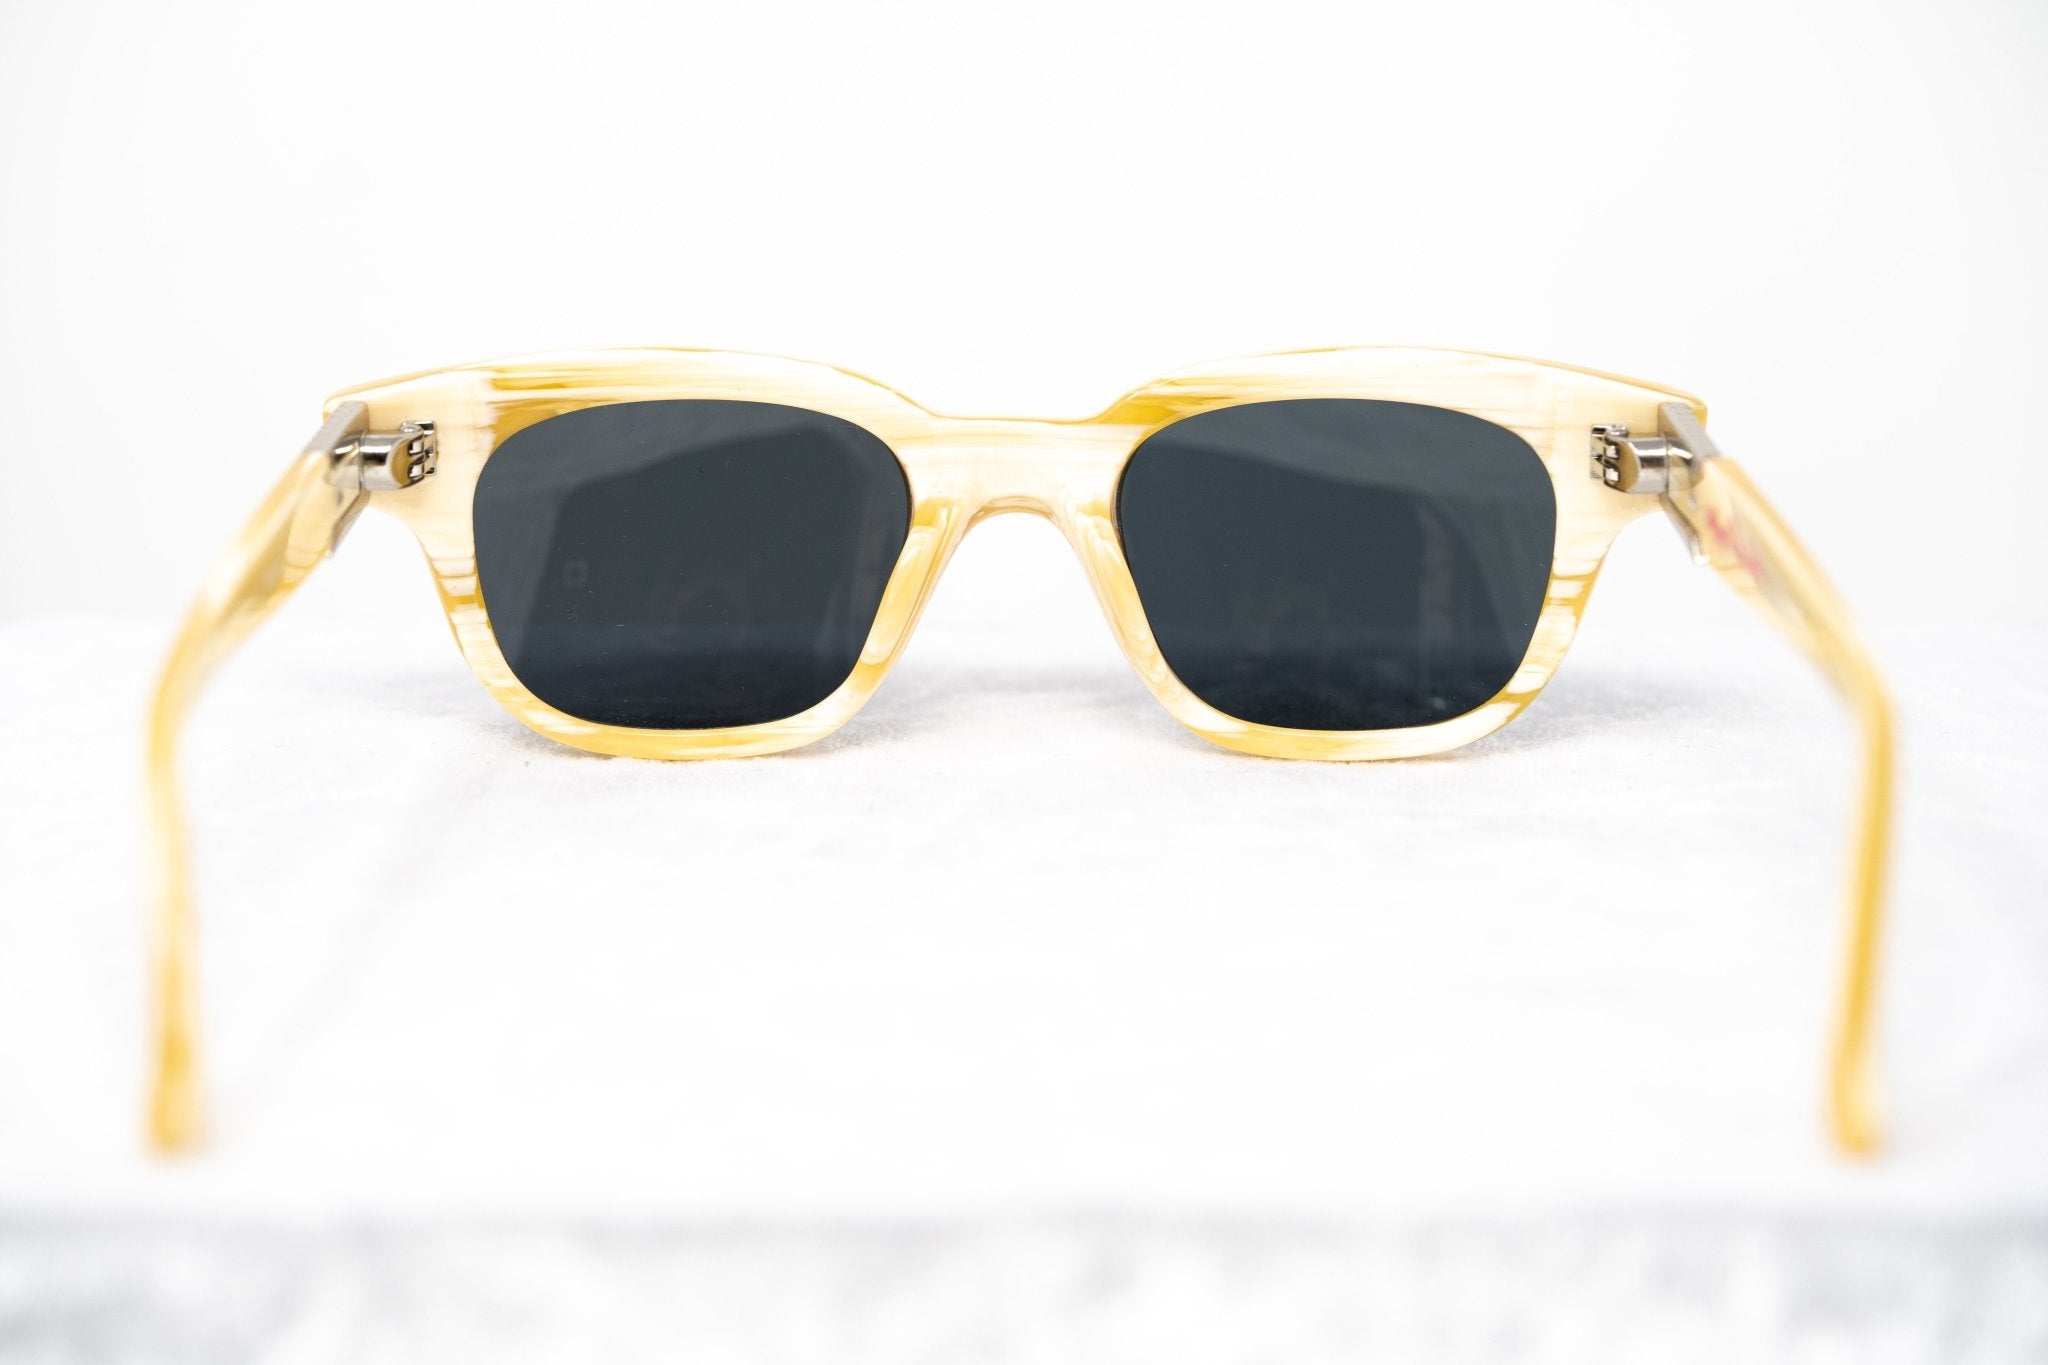 Agent Provocateur Sunglasses Square Striped Yellow and Grey Lenses Category 3 - AP24C6SUN - Watches & Crystals